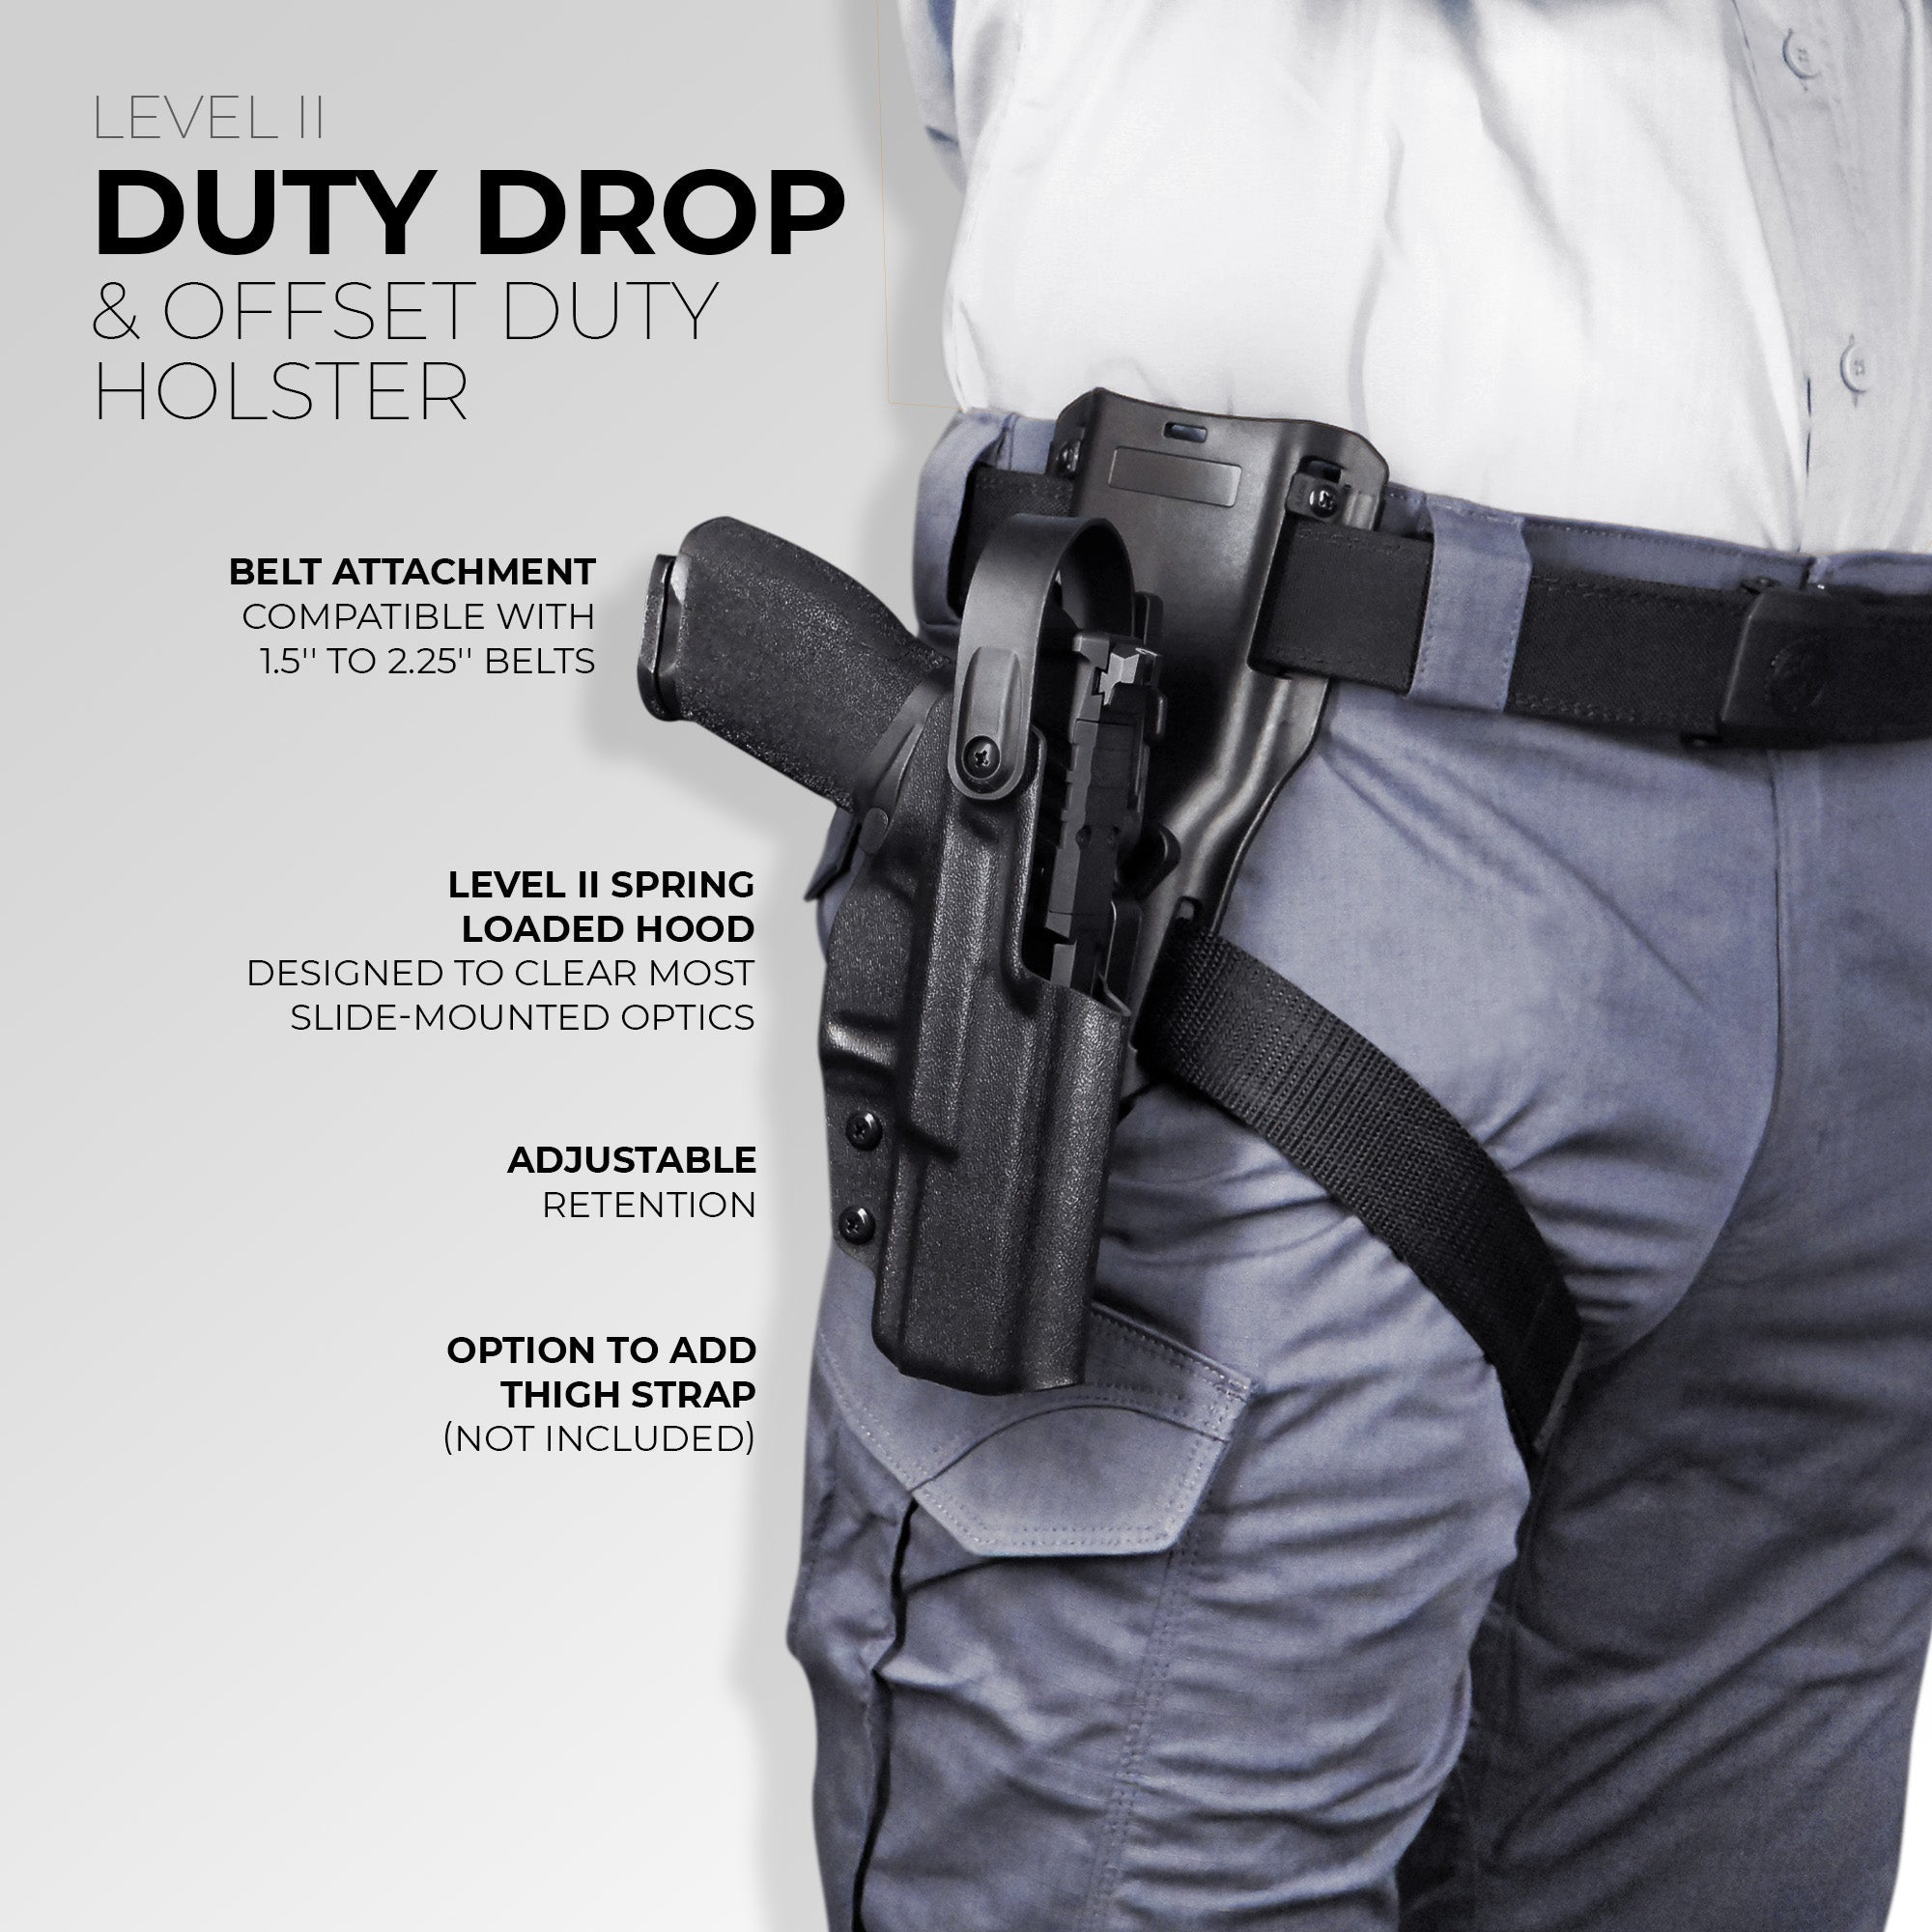 Staccato XC w/ X300 Level II Duty Drop & Offset Holster